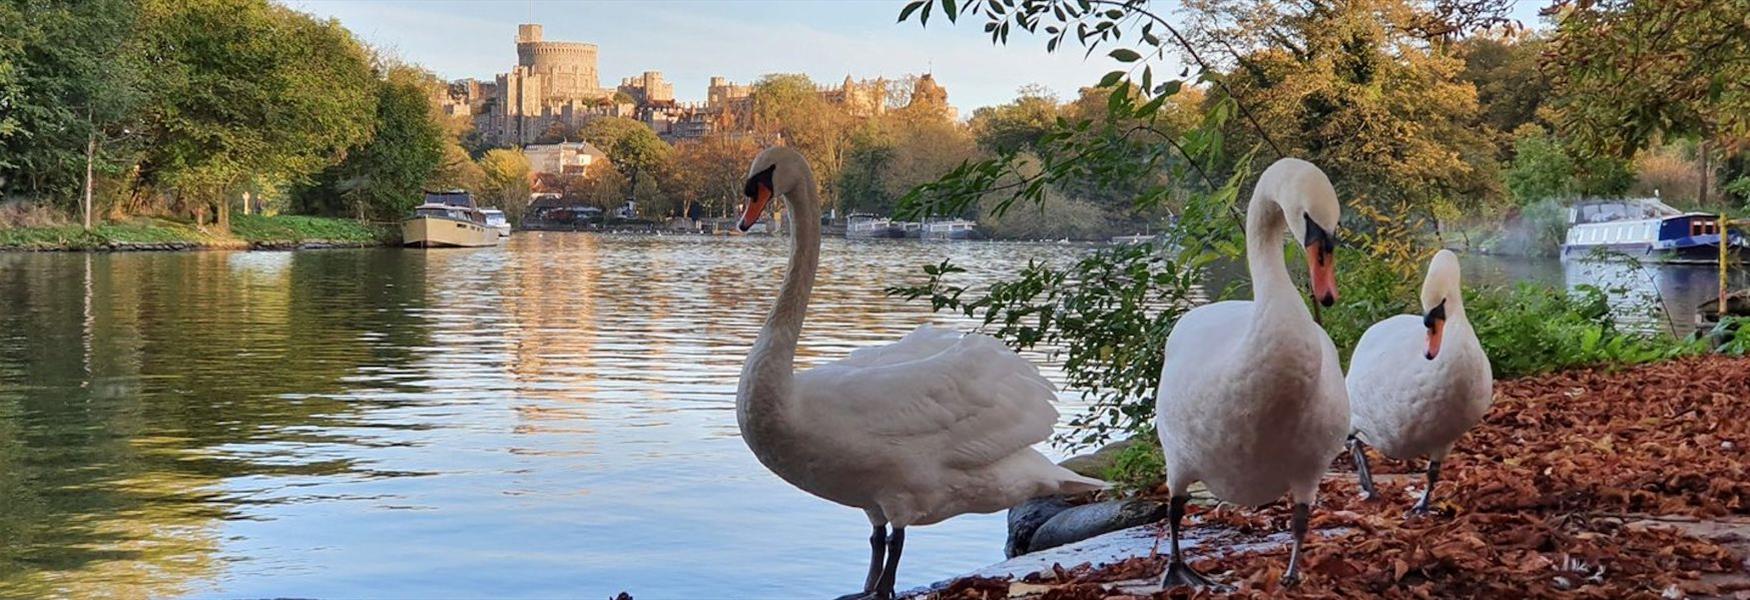 Swans on Baths Island with view of Windsor Castle